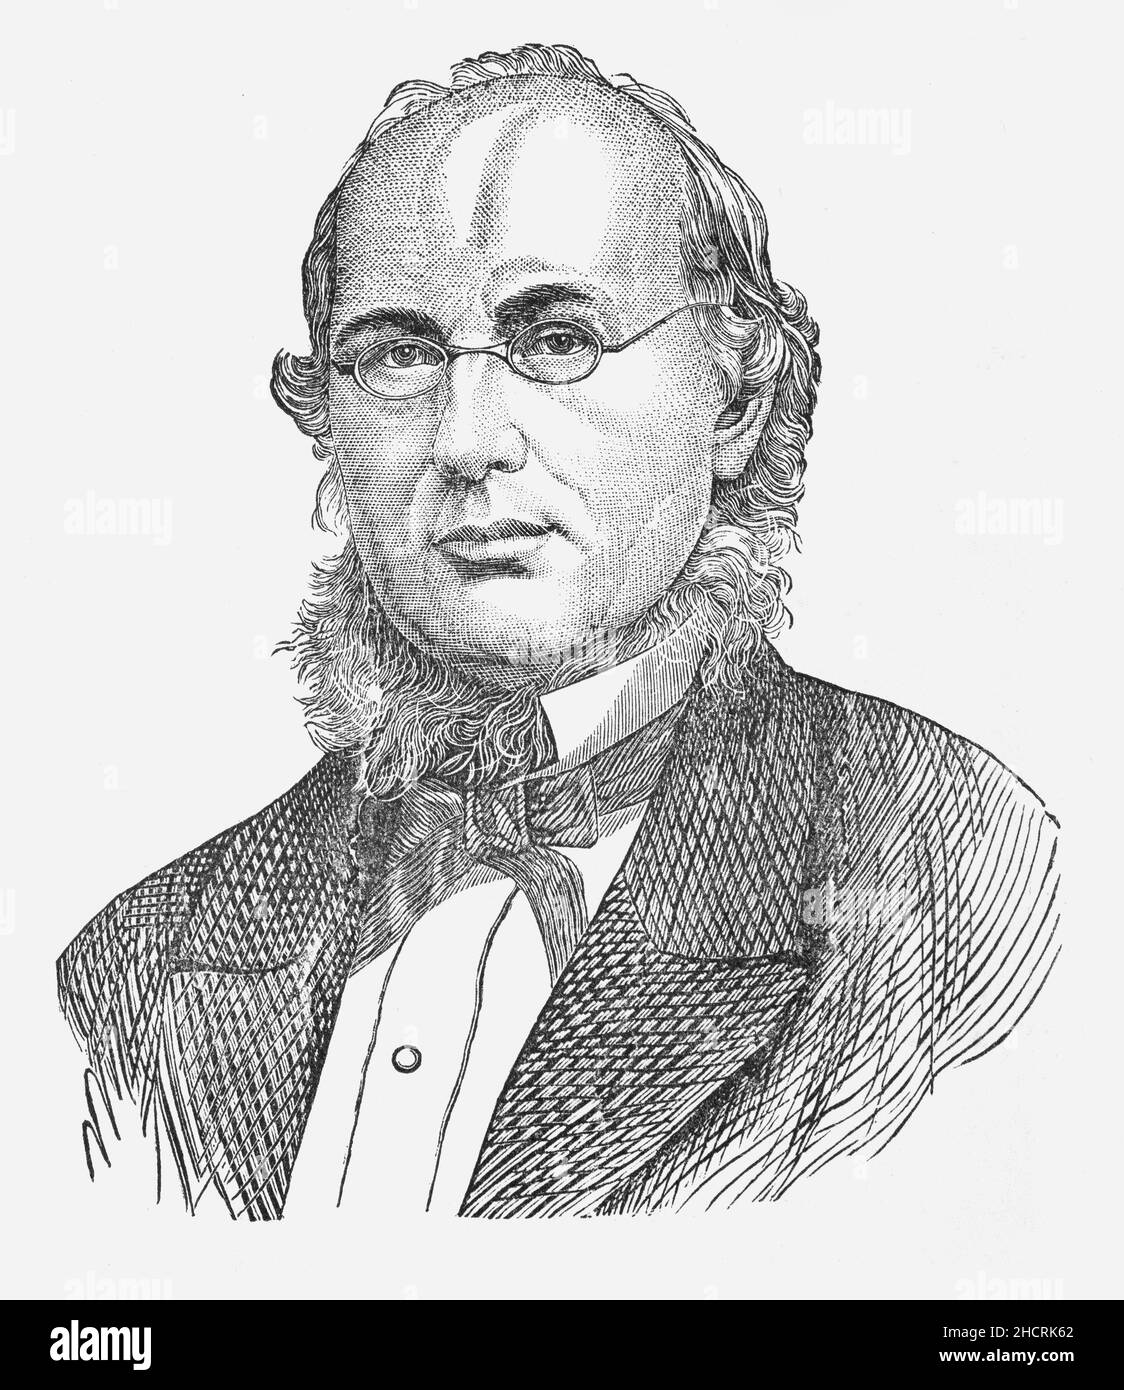 A late 19th Century portrait of Horace Greeley (1811-1872), an American newspaper editor and publisher who was the founder and editor of the New-York Tribune. Long active in politics, he served briefly as a congressman from New York, and was the unsuccessful candidate of the new Liberal Republican Party in the 1872 presidential election against incumbent President Ulysses S. Grant, who won by a landslide. Stock Photo